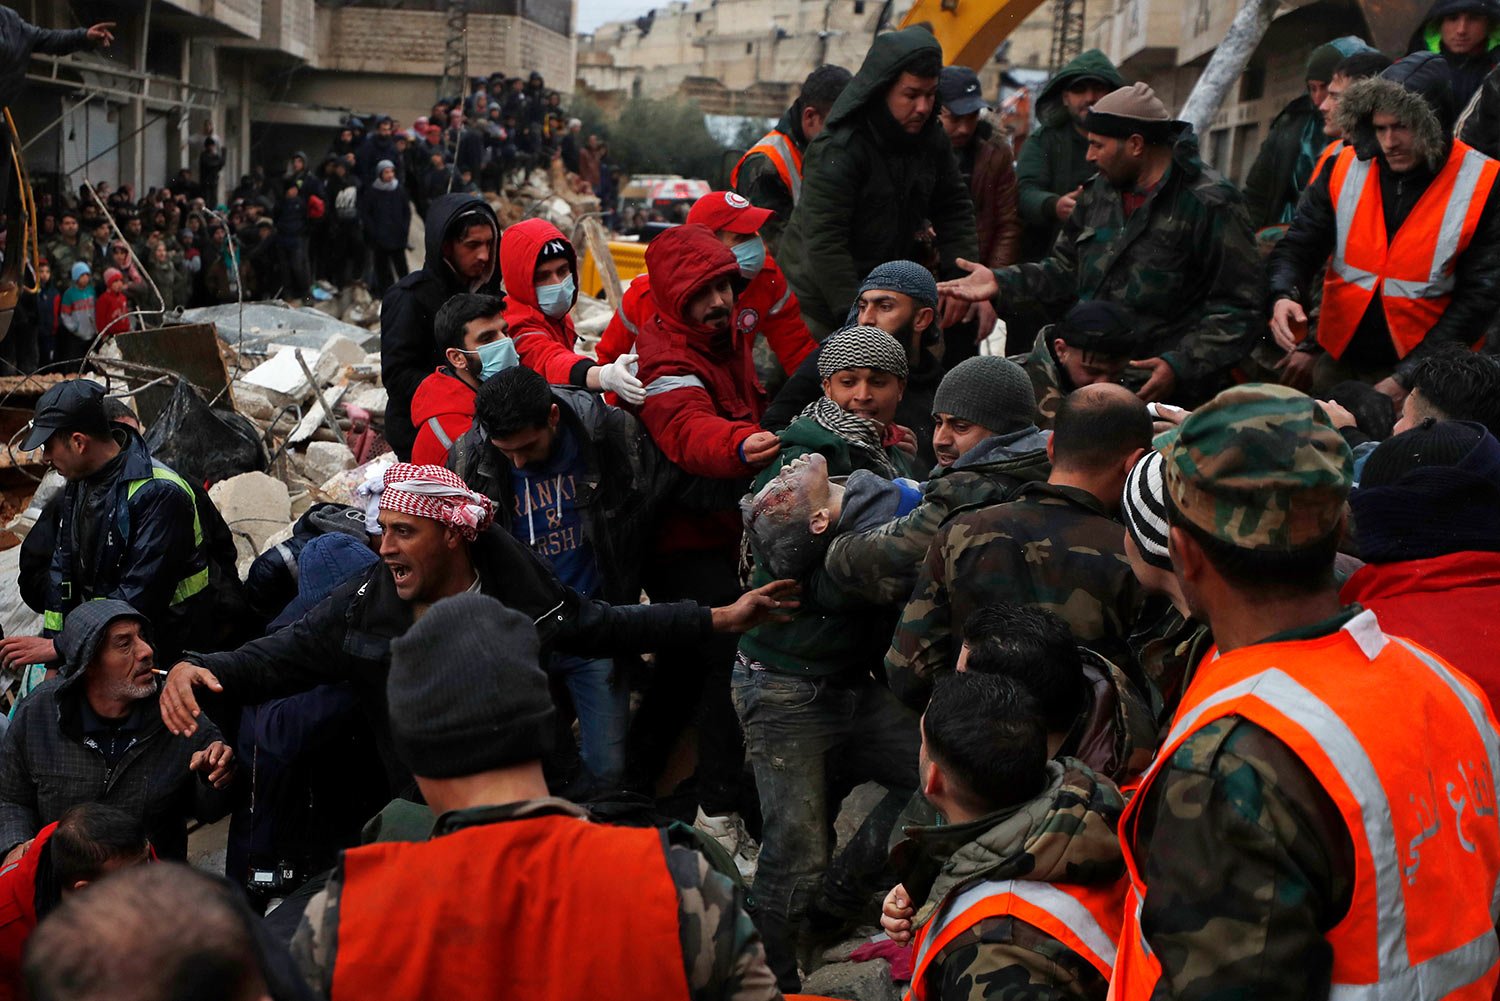  Civil defense workers and security forces carry an earthquake victim as they search through the wreckage of collapsed buildings in Hama, Syria, Monday, Feb. 6, 2023. (AP Photo/Omar Sanadiki) 